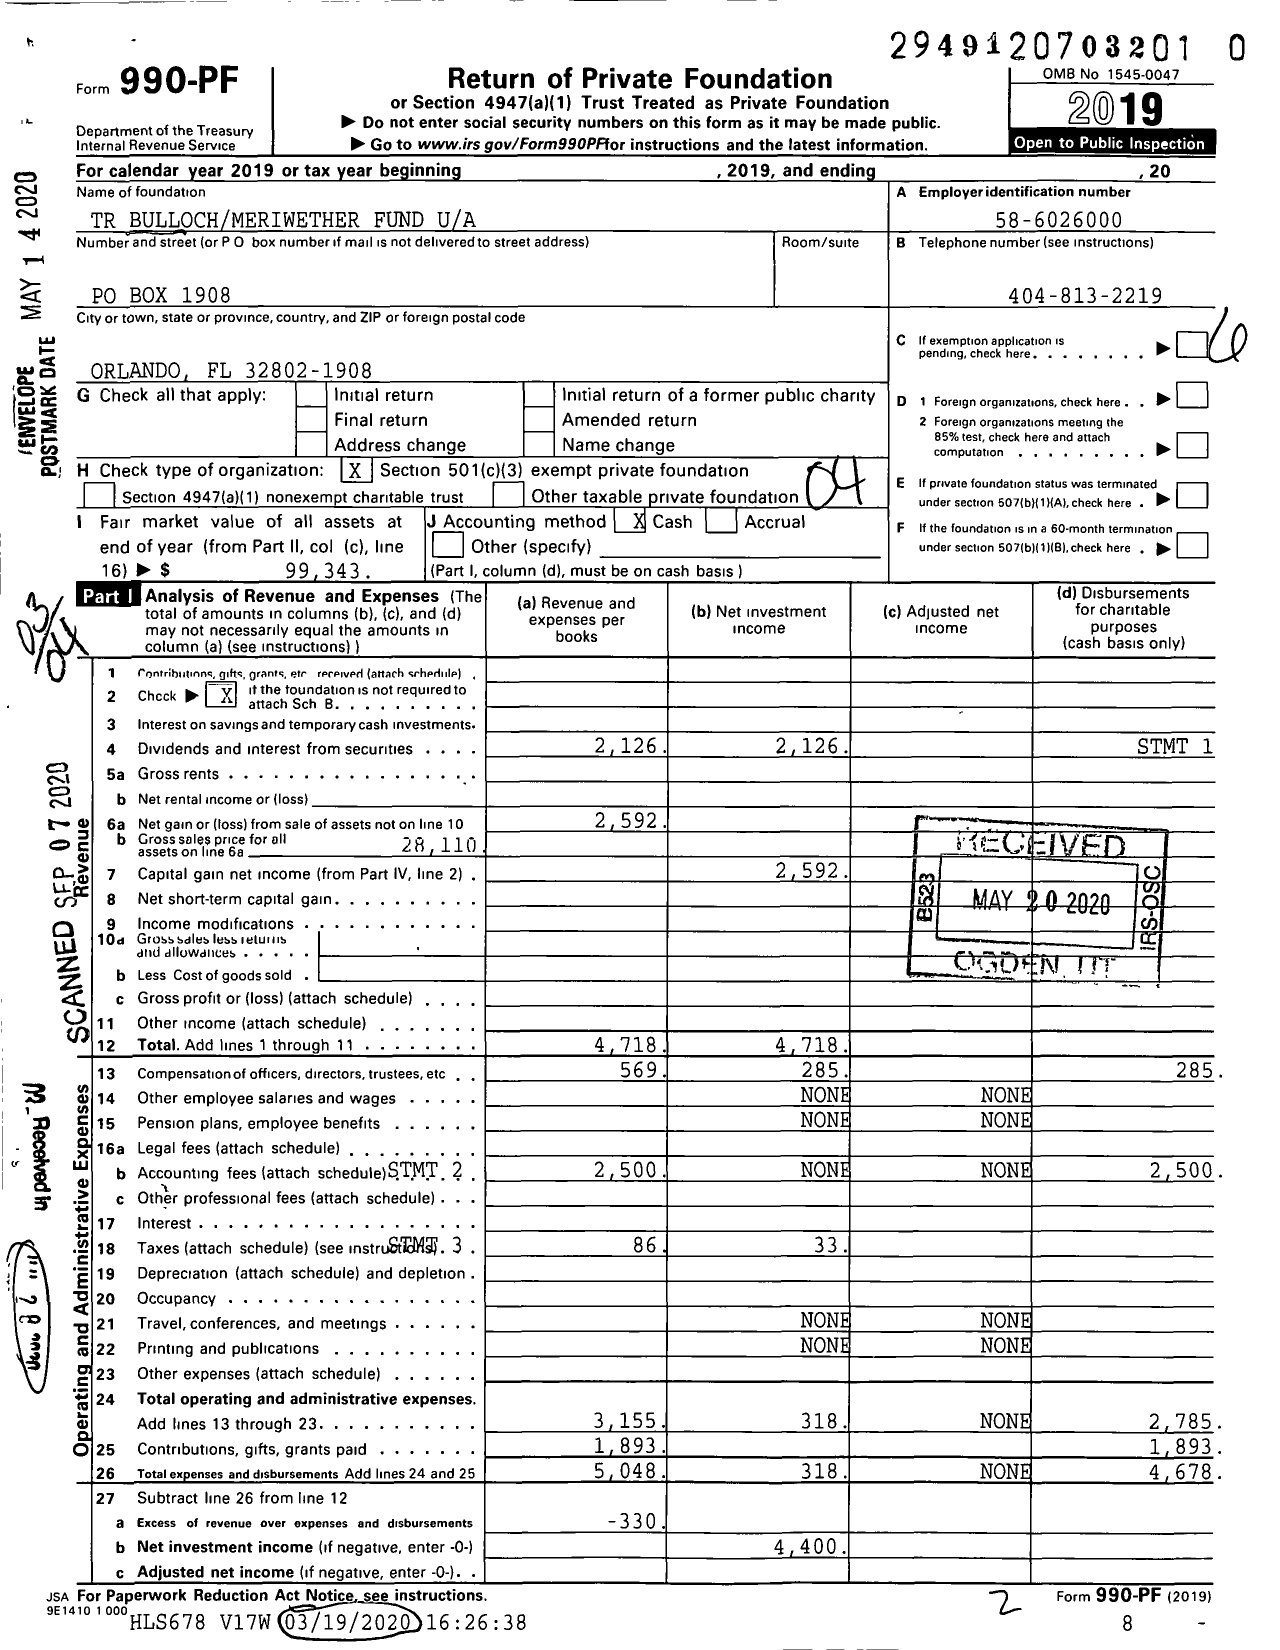 Image of first page of 2019 Form 990PR for TR Bullochmeriwether Fund